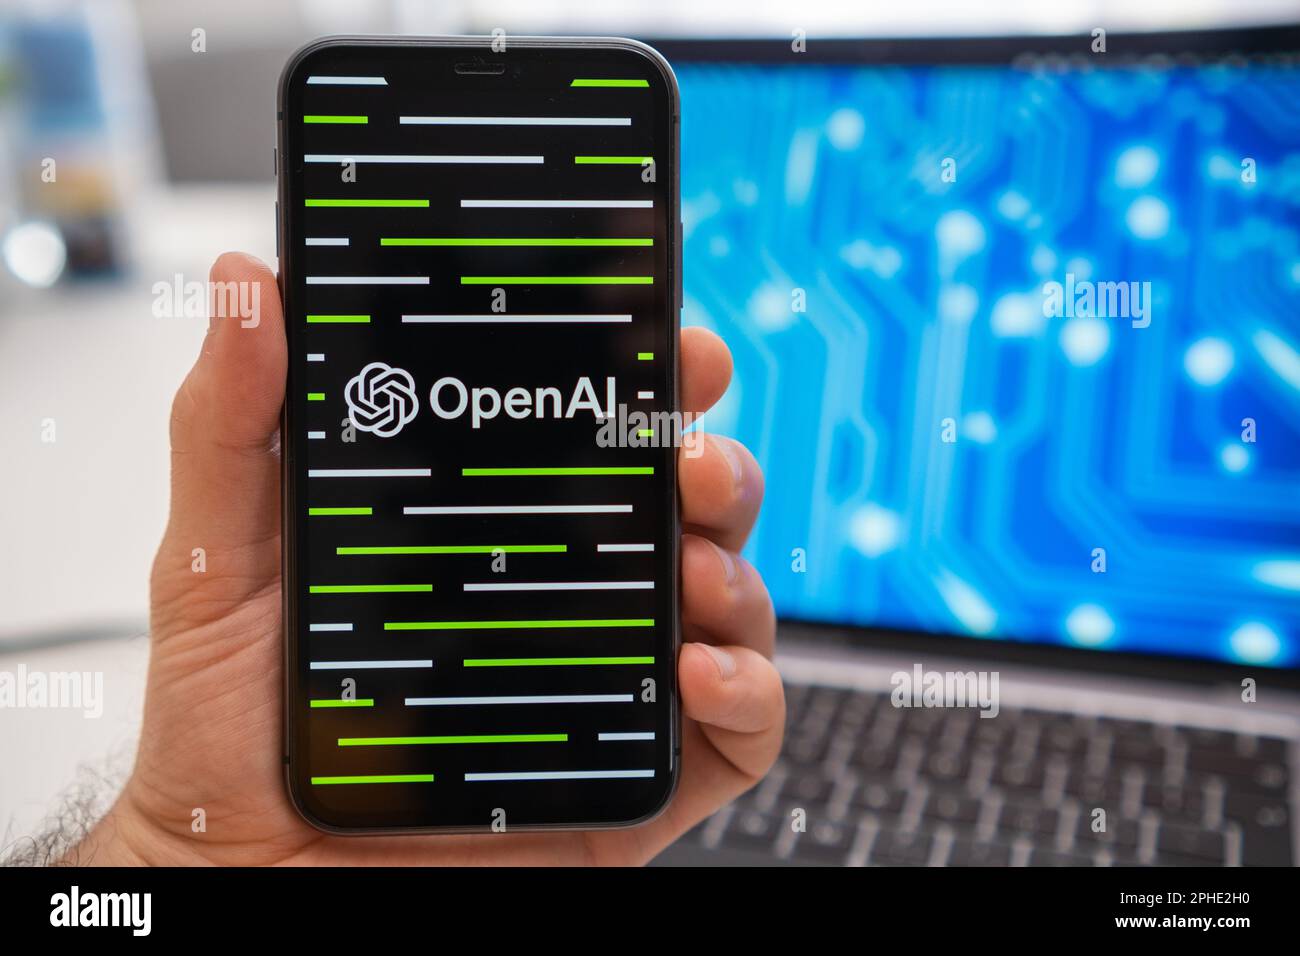 OpenAI logo of neural network on the screen of smartphone in mans hand and laptop with neuronet on the splash screen on the background. Artificial intelligence concept, March 2023, Prague, Czech Republic. Stock Photo